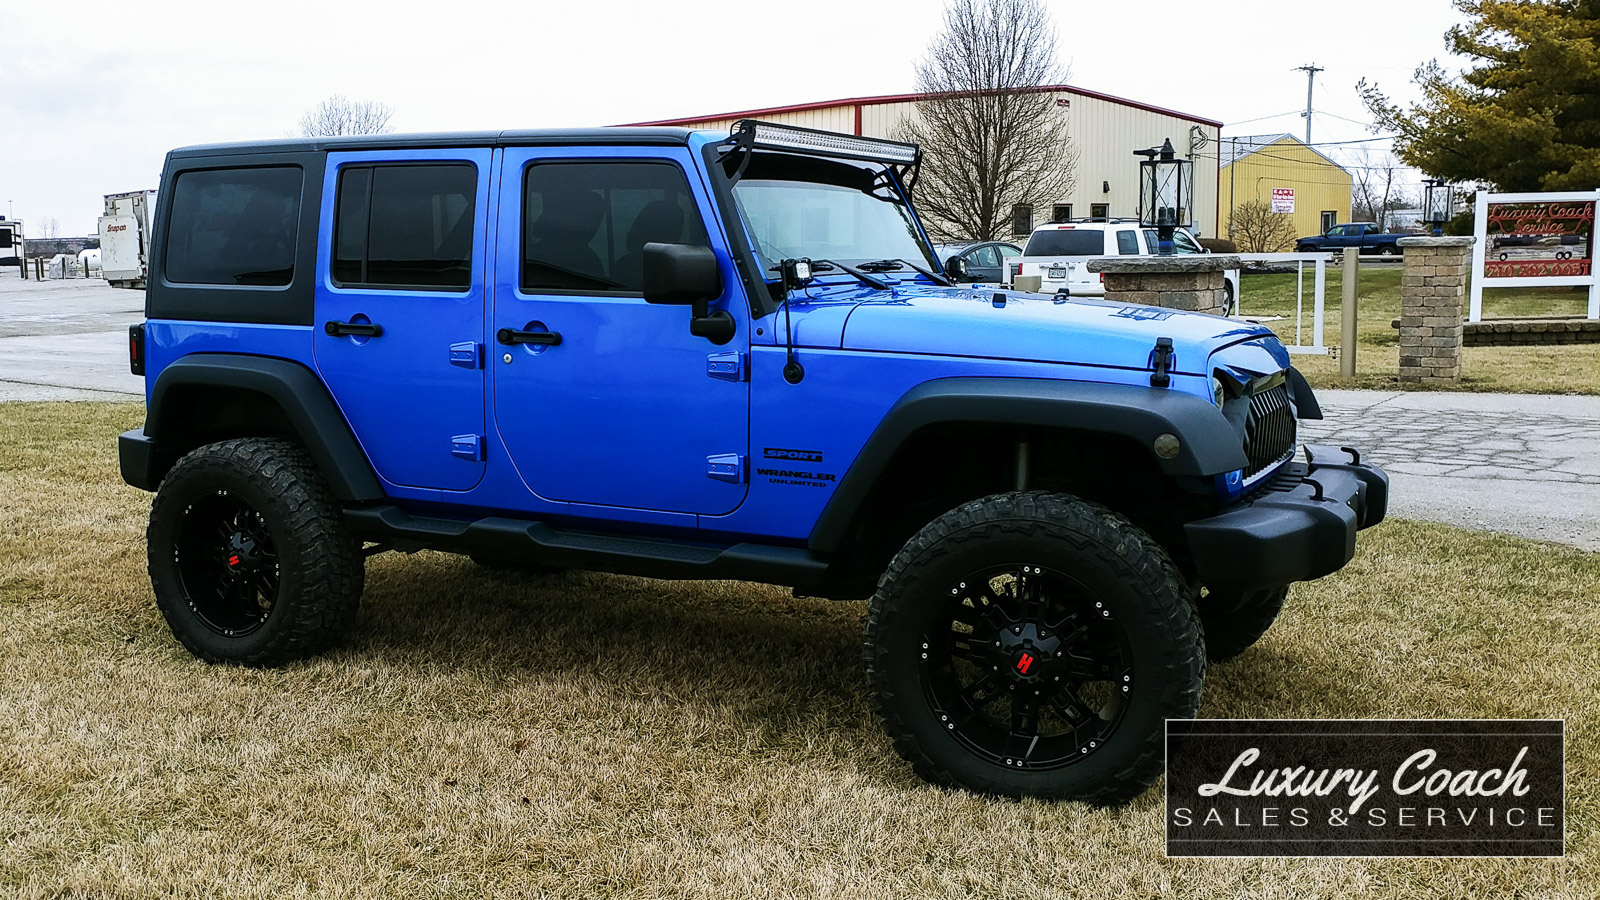 FOR SALE: 2015 Jeep Wrangler Unlimited Sport 4x4 | Luxury Coach